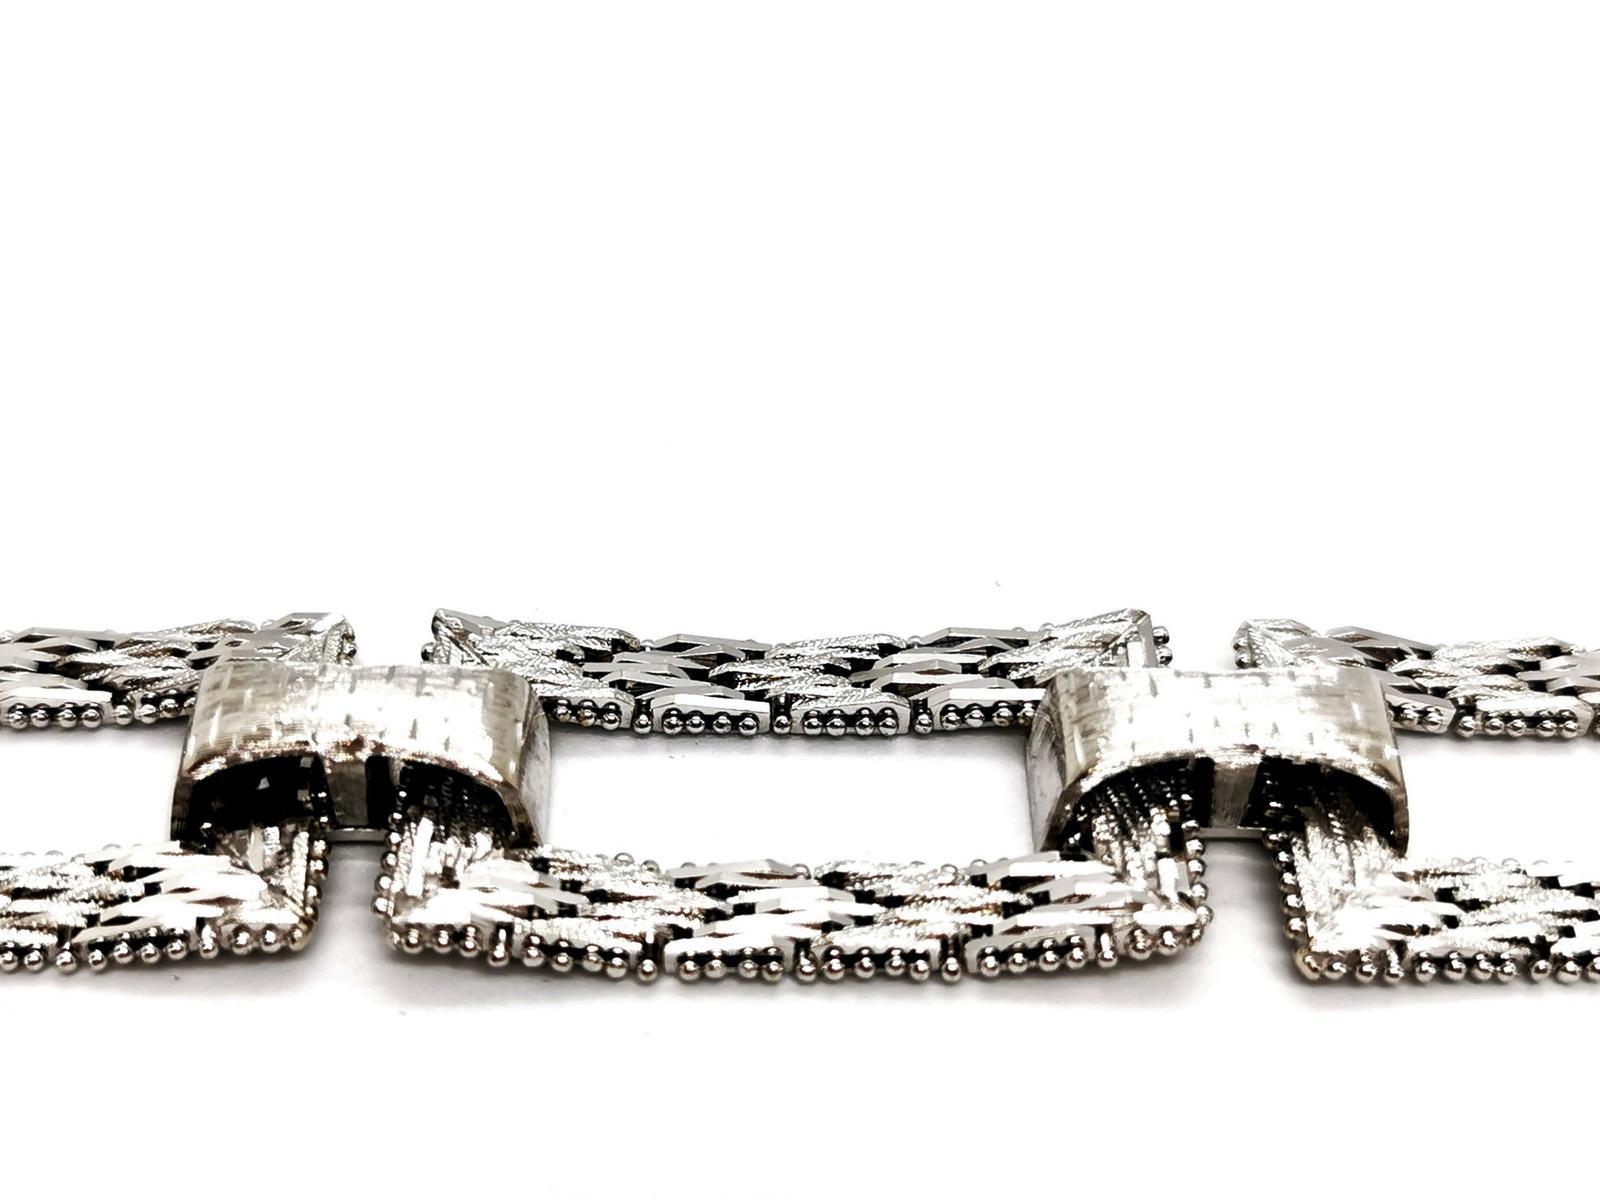 Bracelet art deco. white gold 750 mils (18K). composed of five rectangular flexible links. worked in matt or shiny. length: 19 cm. width: 1.85 cm. rectangular patterns dimensions: 3.4 cm x 1.85 cm. with eight safety clasp. total weight: 57.30 g.